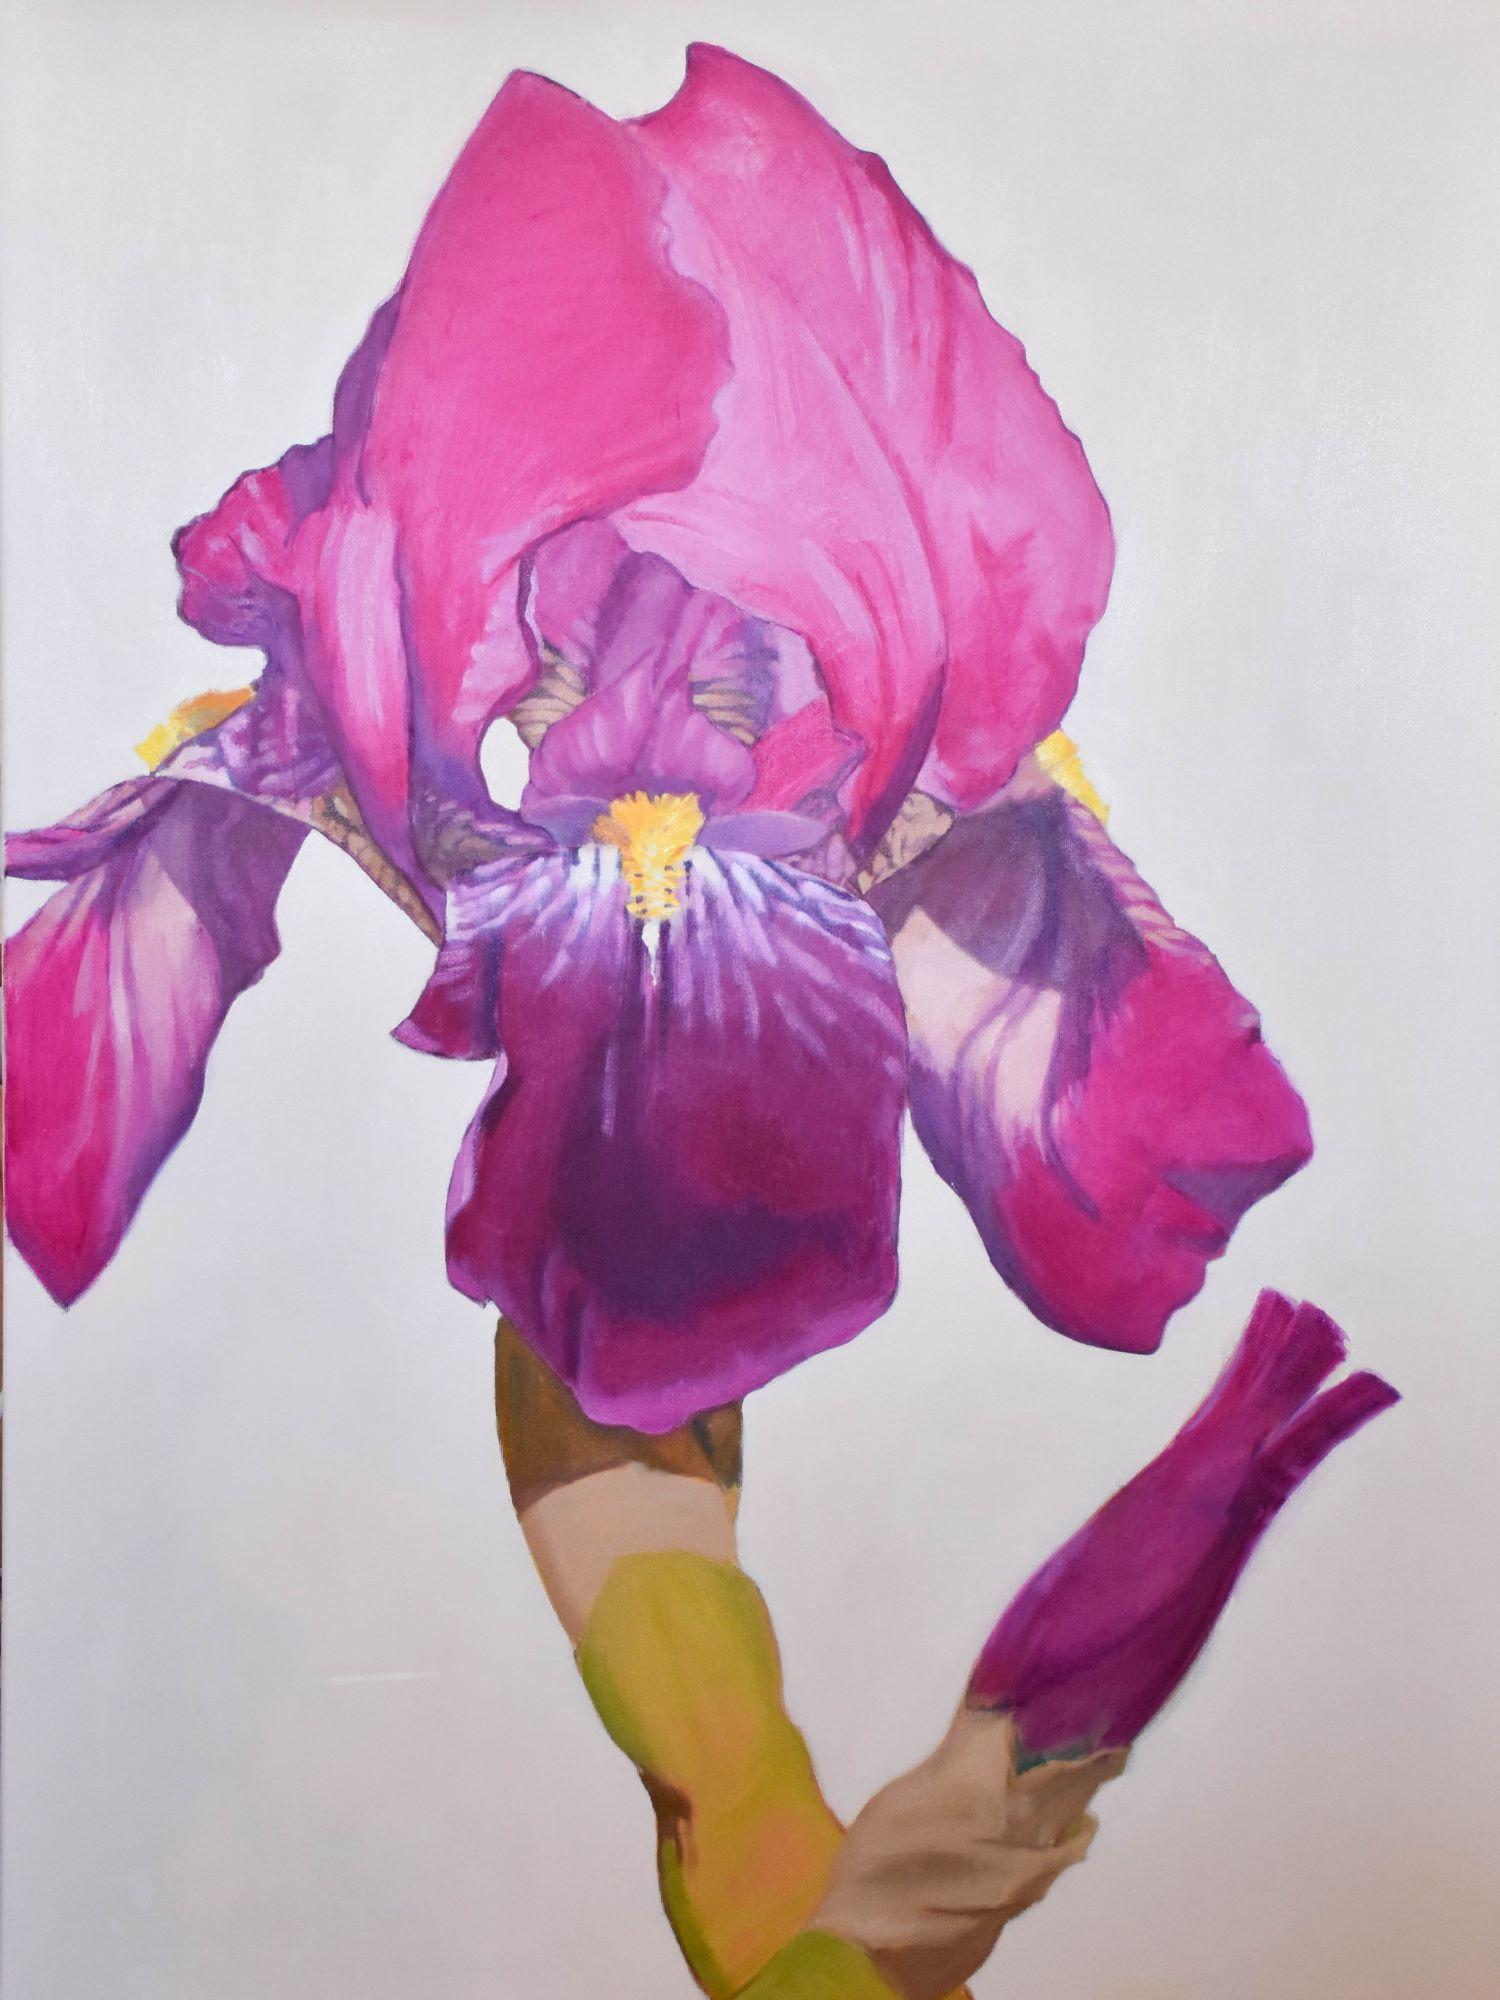 The Pink Iris, Oil Painting, Floral Painting, Still Life, Framed, American Art 4